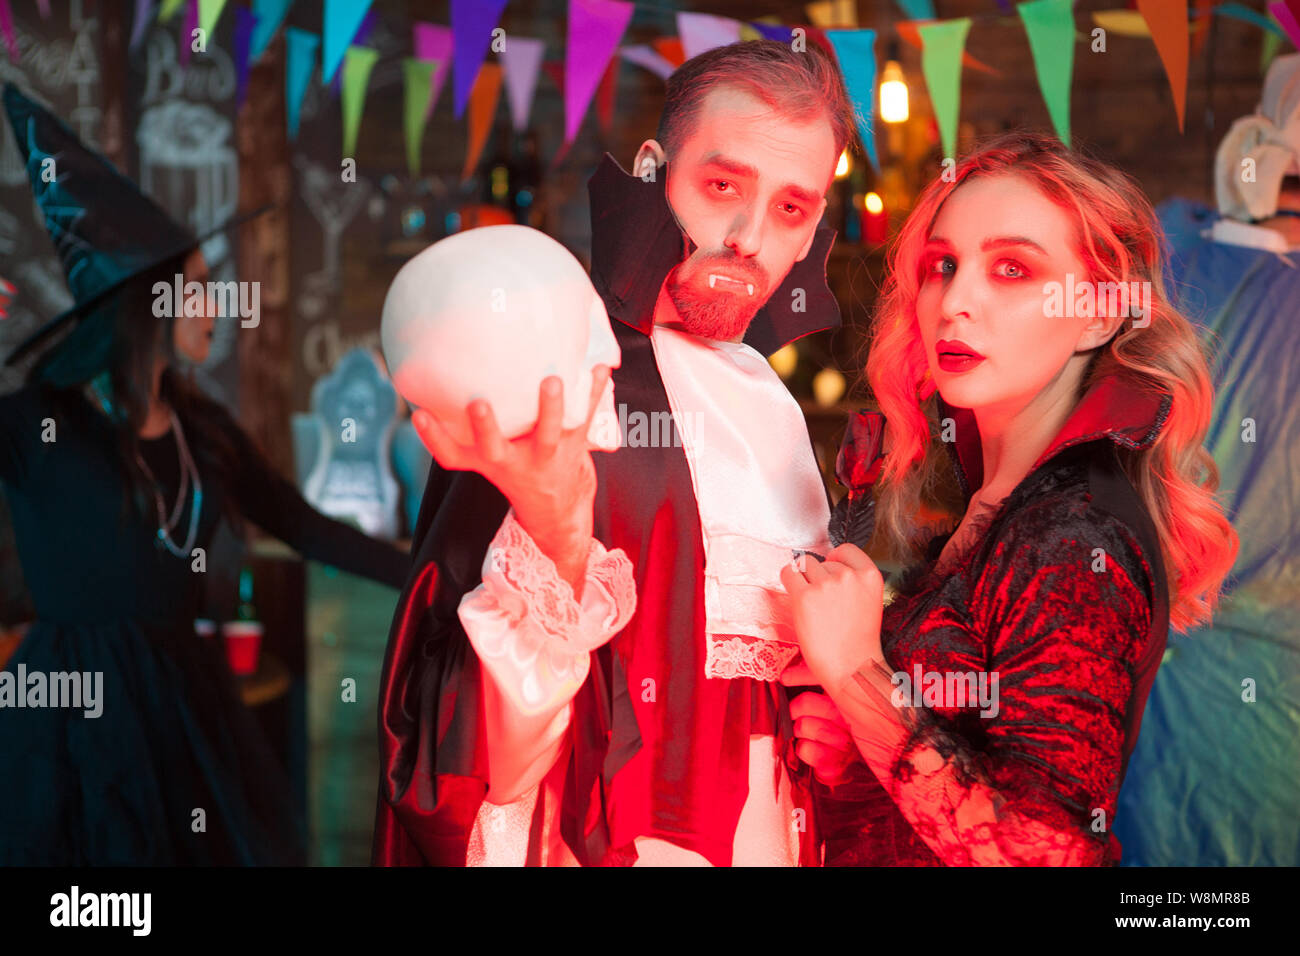 Attractive young couple dressed up like vampire costumes for halloween celebration. Halloween monsters gathering. Stock Photo